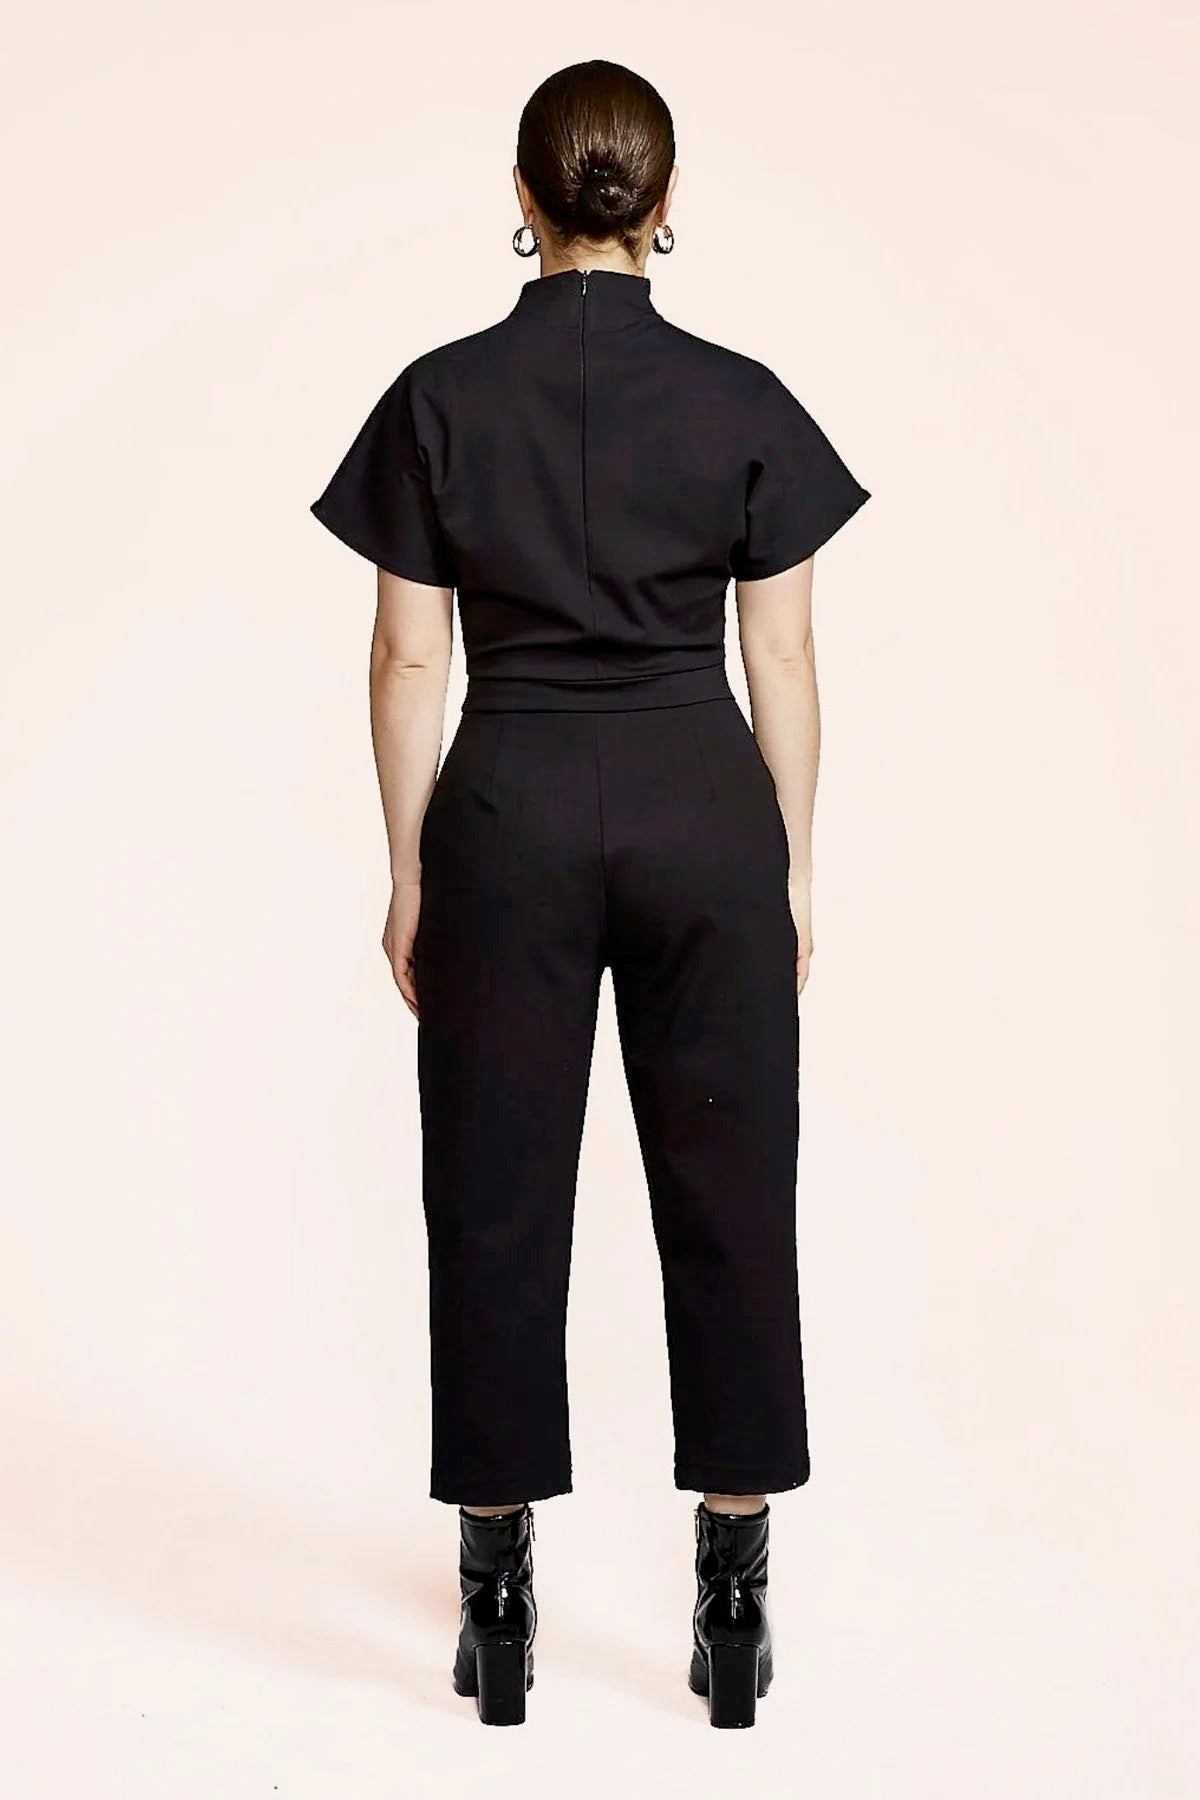 Herby Jumpsuit by Melow, Black, back view, high collar, plunging neckline, fitted waist, short sleeves, 7/8 length legs, pockets, sizes XS to XXL, made in Montreal